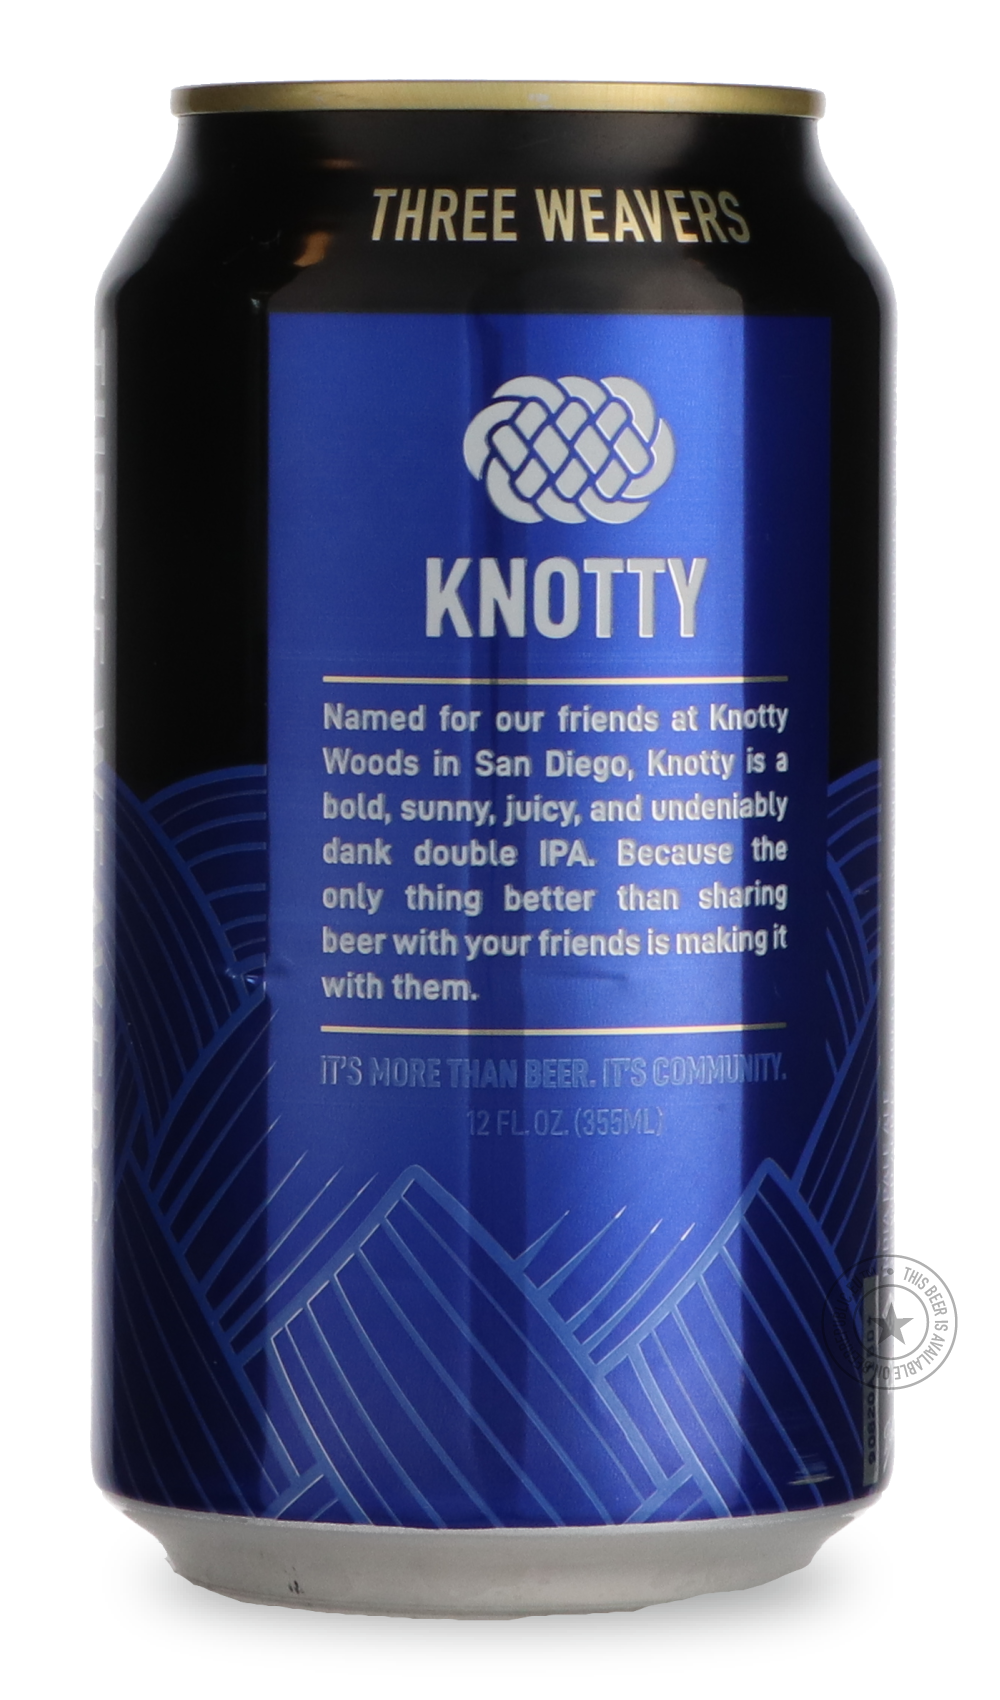 -Three Weavers- Knotty-IPA- Only @ Beer Republic - The best online beer store for American & Canadian craft beer - Buy beer online from the USA and Canada - Bier online kopen - Amerikaans bier kopen - Craft beer store - Craft beer kopen - Amerikanisch bier kaufen - Bier online kaufen - Acheter biere online - IPA - Stout - Porter - New England IPA - Hazy IPA - Imperial Stout - Barrel Aged - Barrel Aged Imperial Stout - Brown - Dark beer - Blond - Blonde - Pilsner - Lager - Wheat - Weizen - Amber - Barley Win